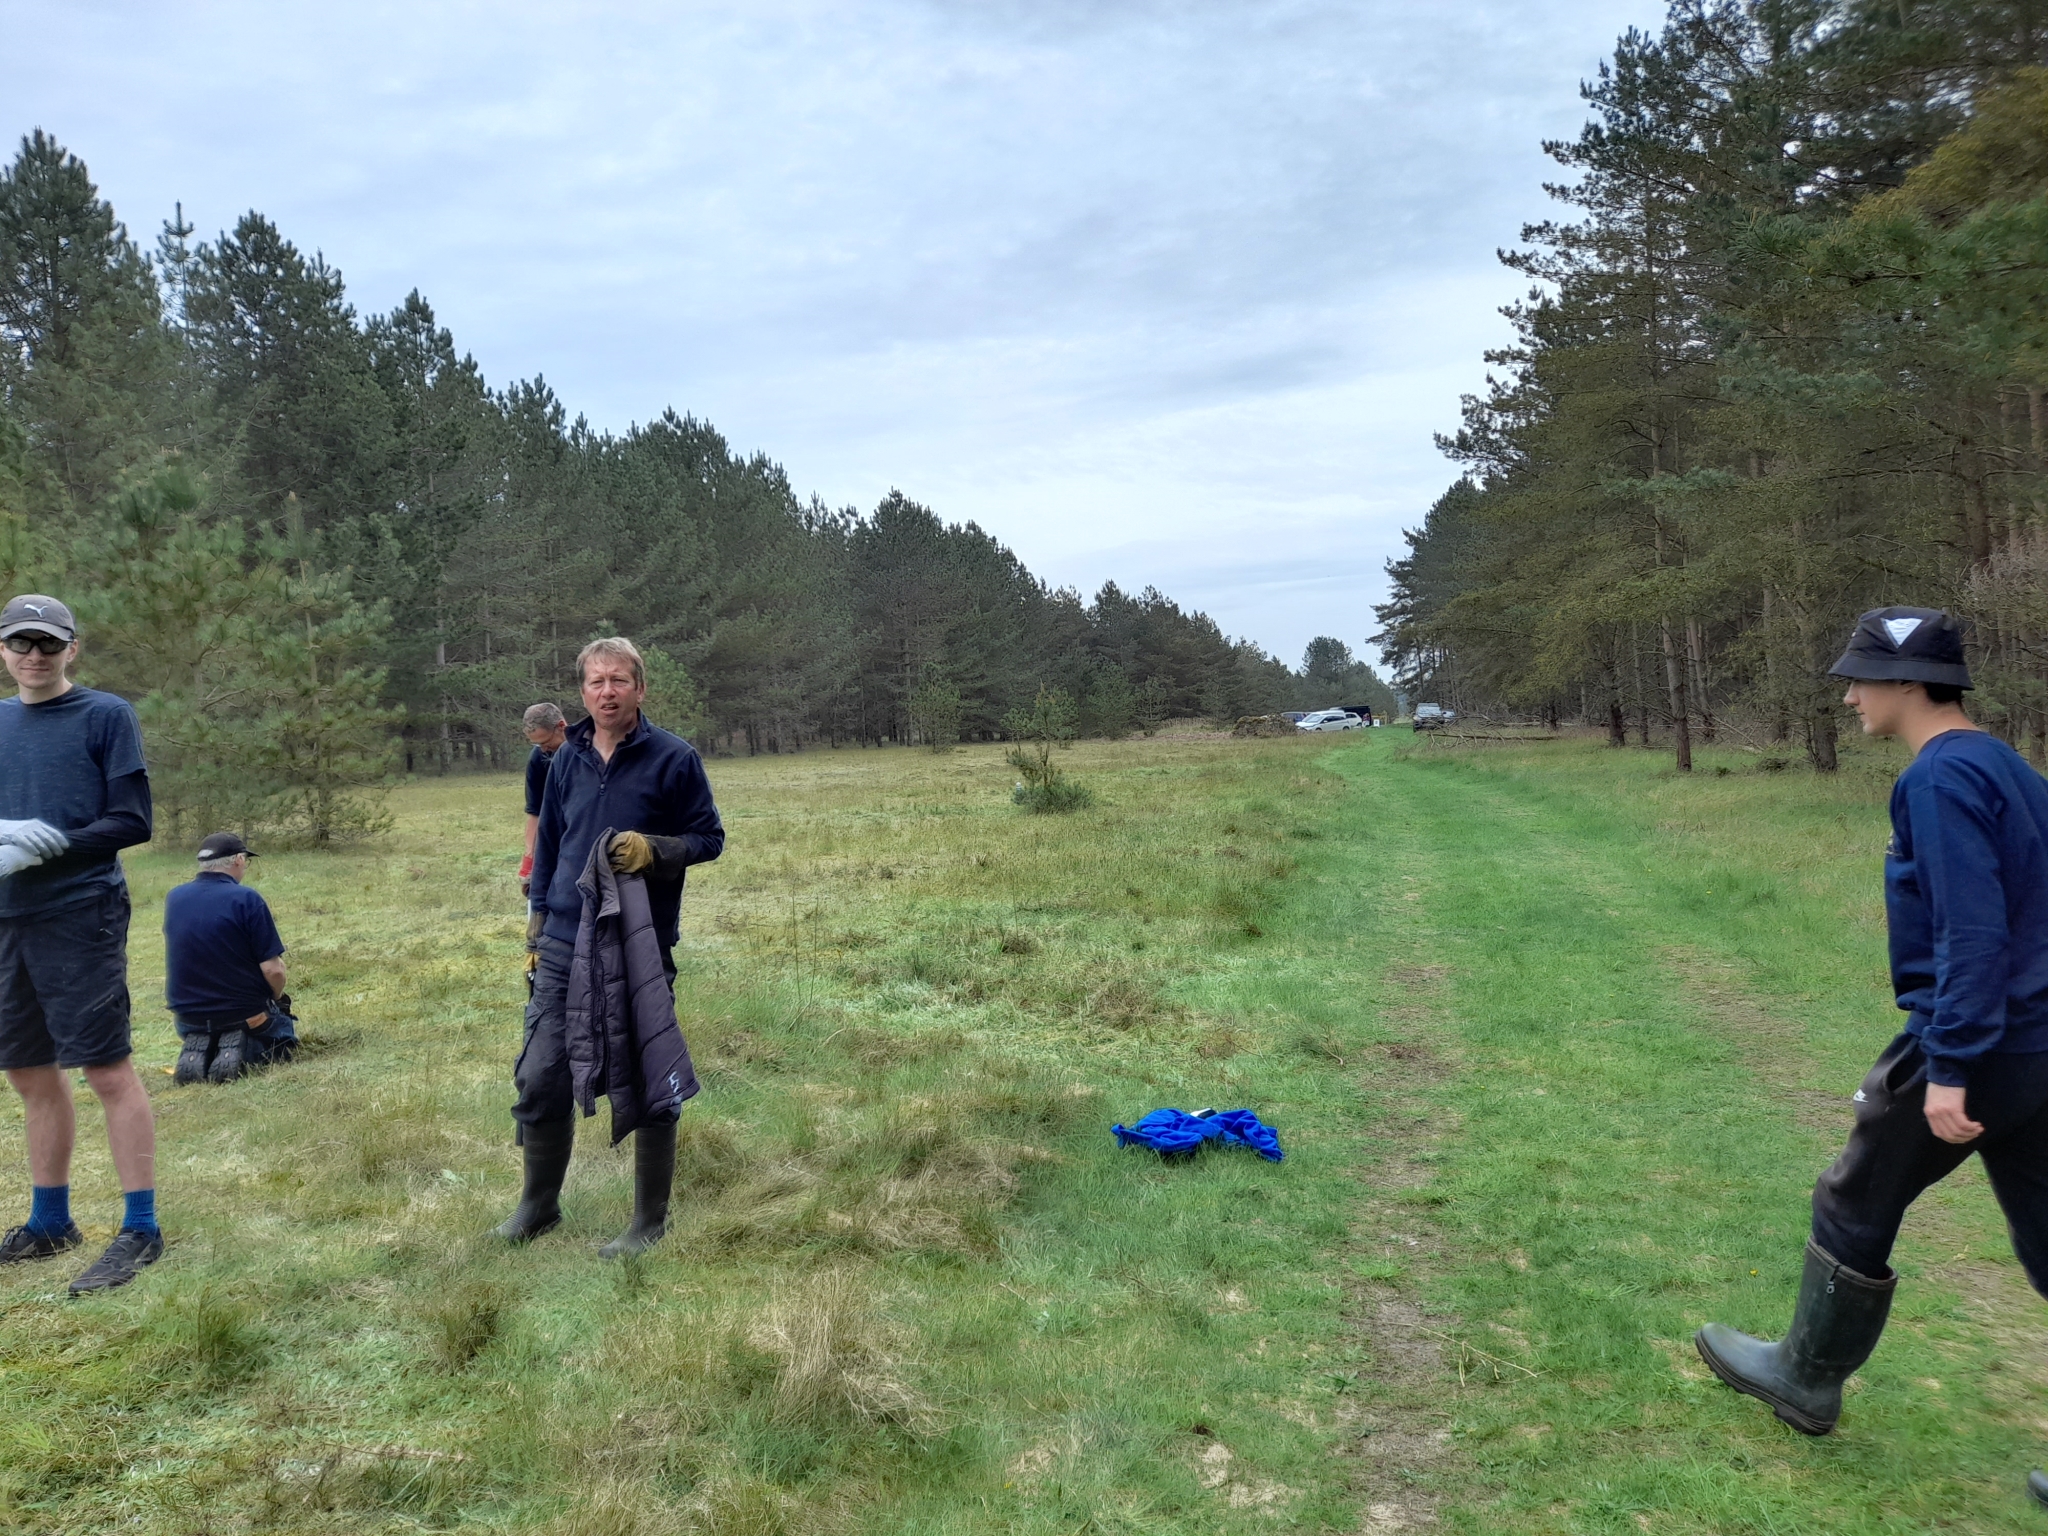 A photo from the FoTF Conservation Event - May 2022 - Self Sown Fir Removal at Kings Forest : A number of the volunteers at the event